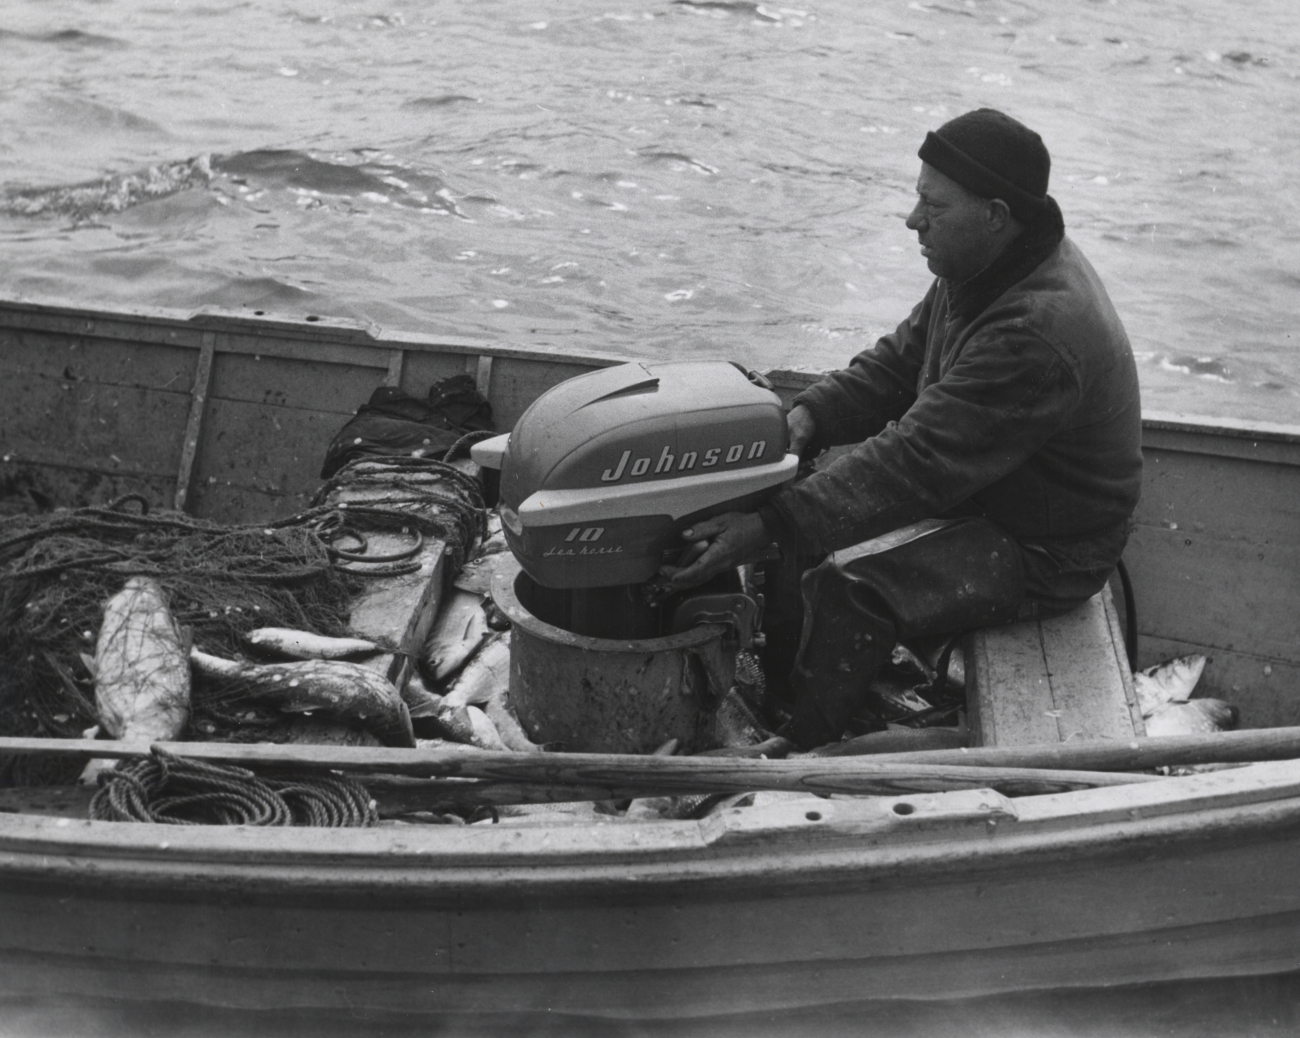 Small boat used in shad fishery - outboard amidships forward to facilitatehauling net over stern